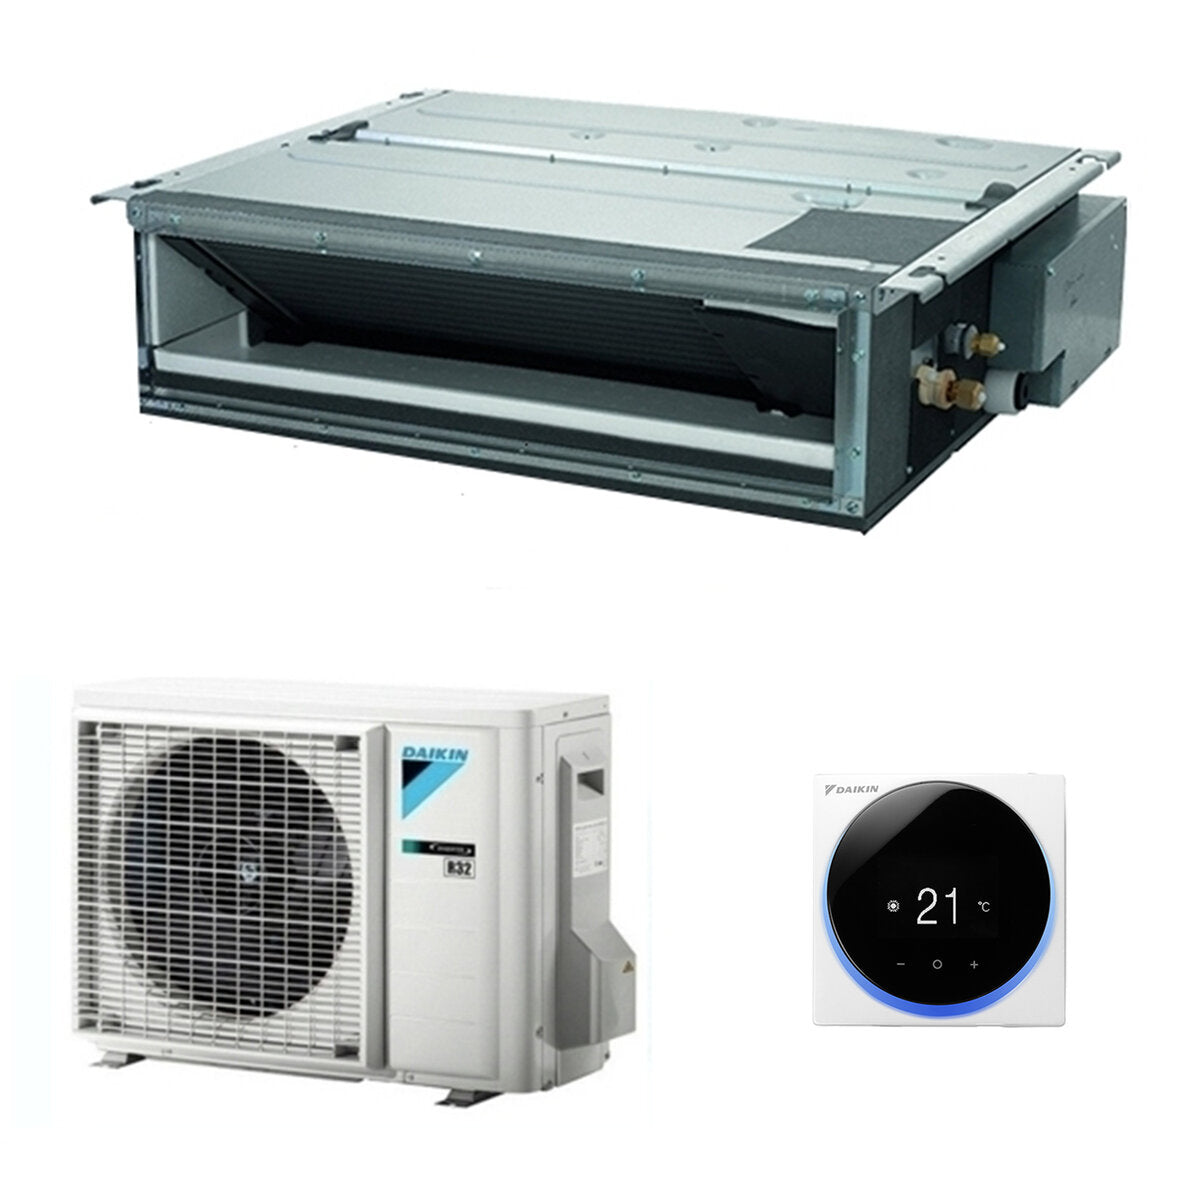 Daikin Mini Sky FDXM-F9 ductable air conditioner 9000 BTU inverter A+ R32 with wall control